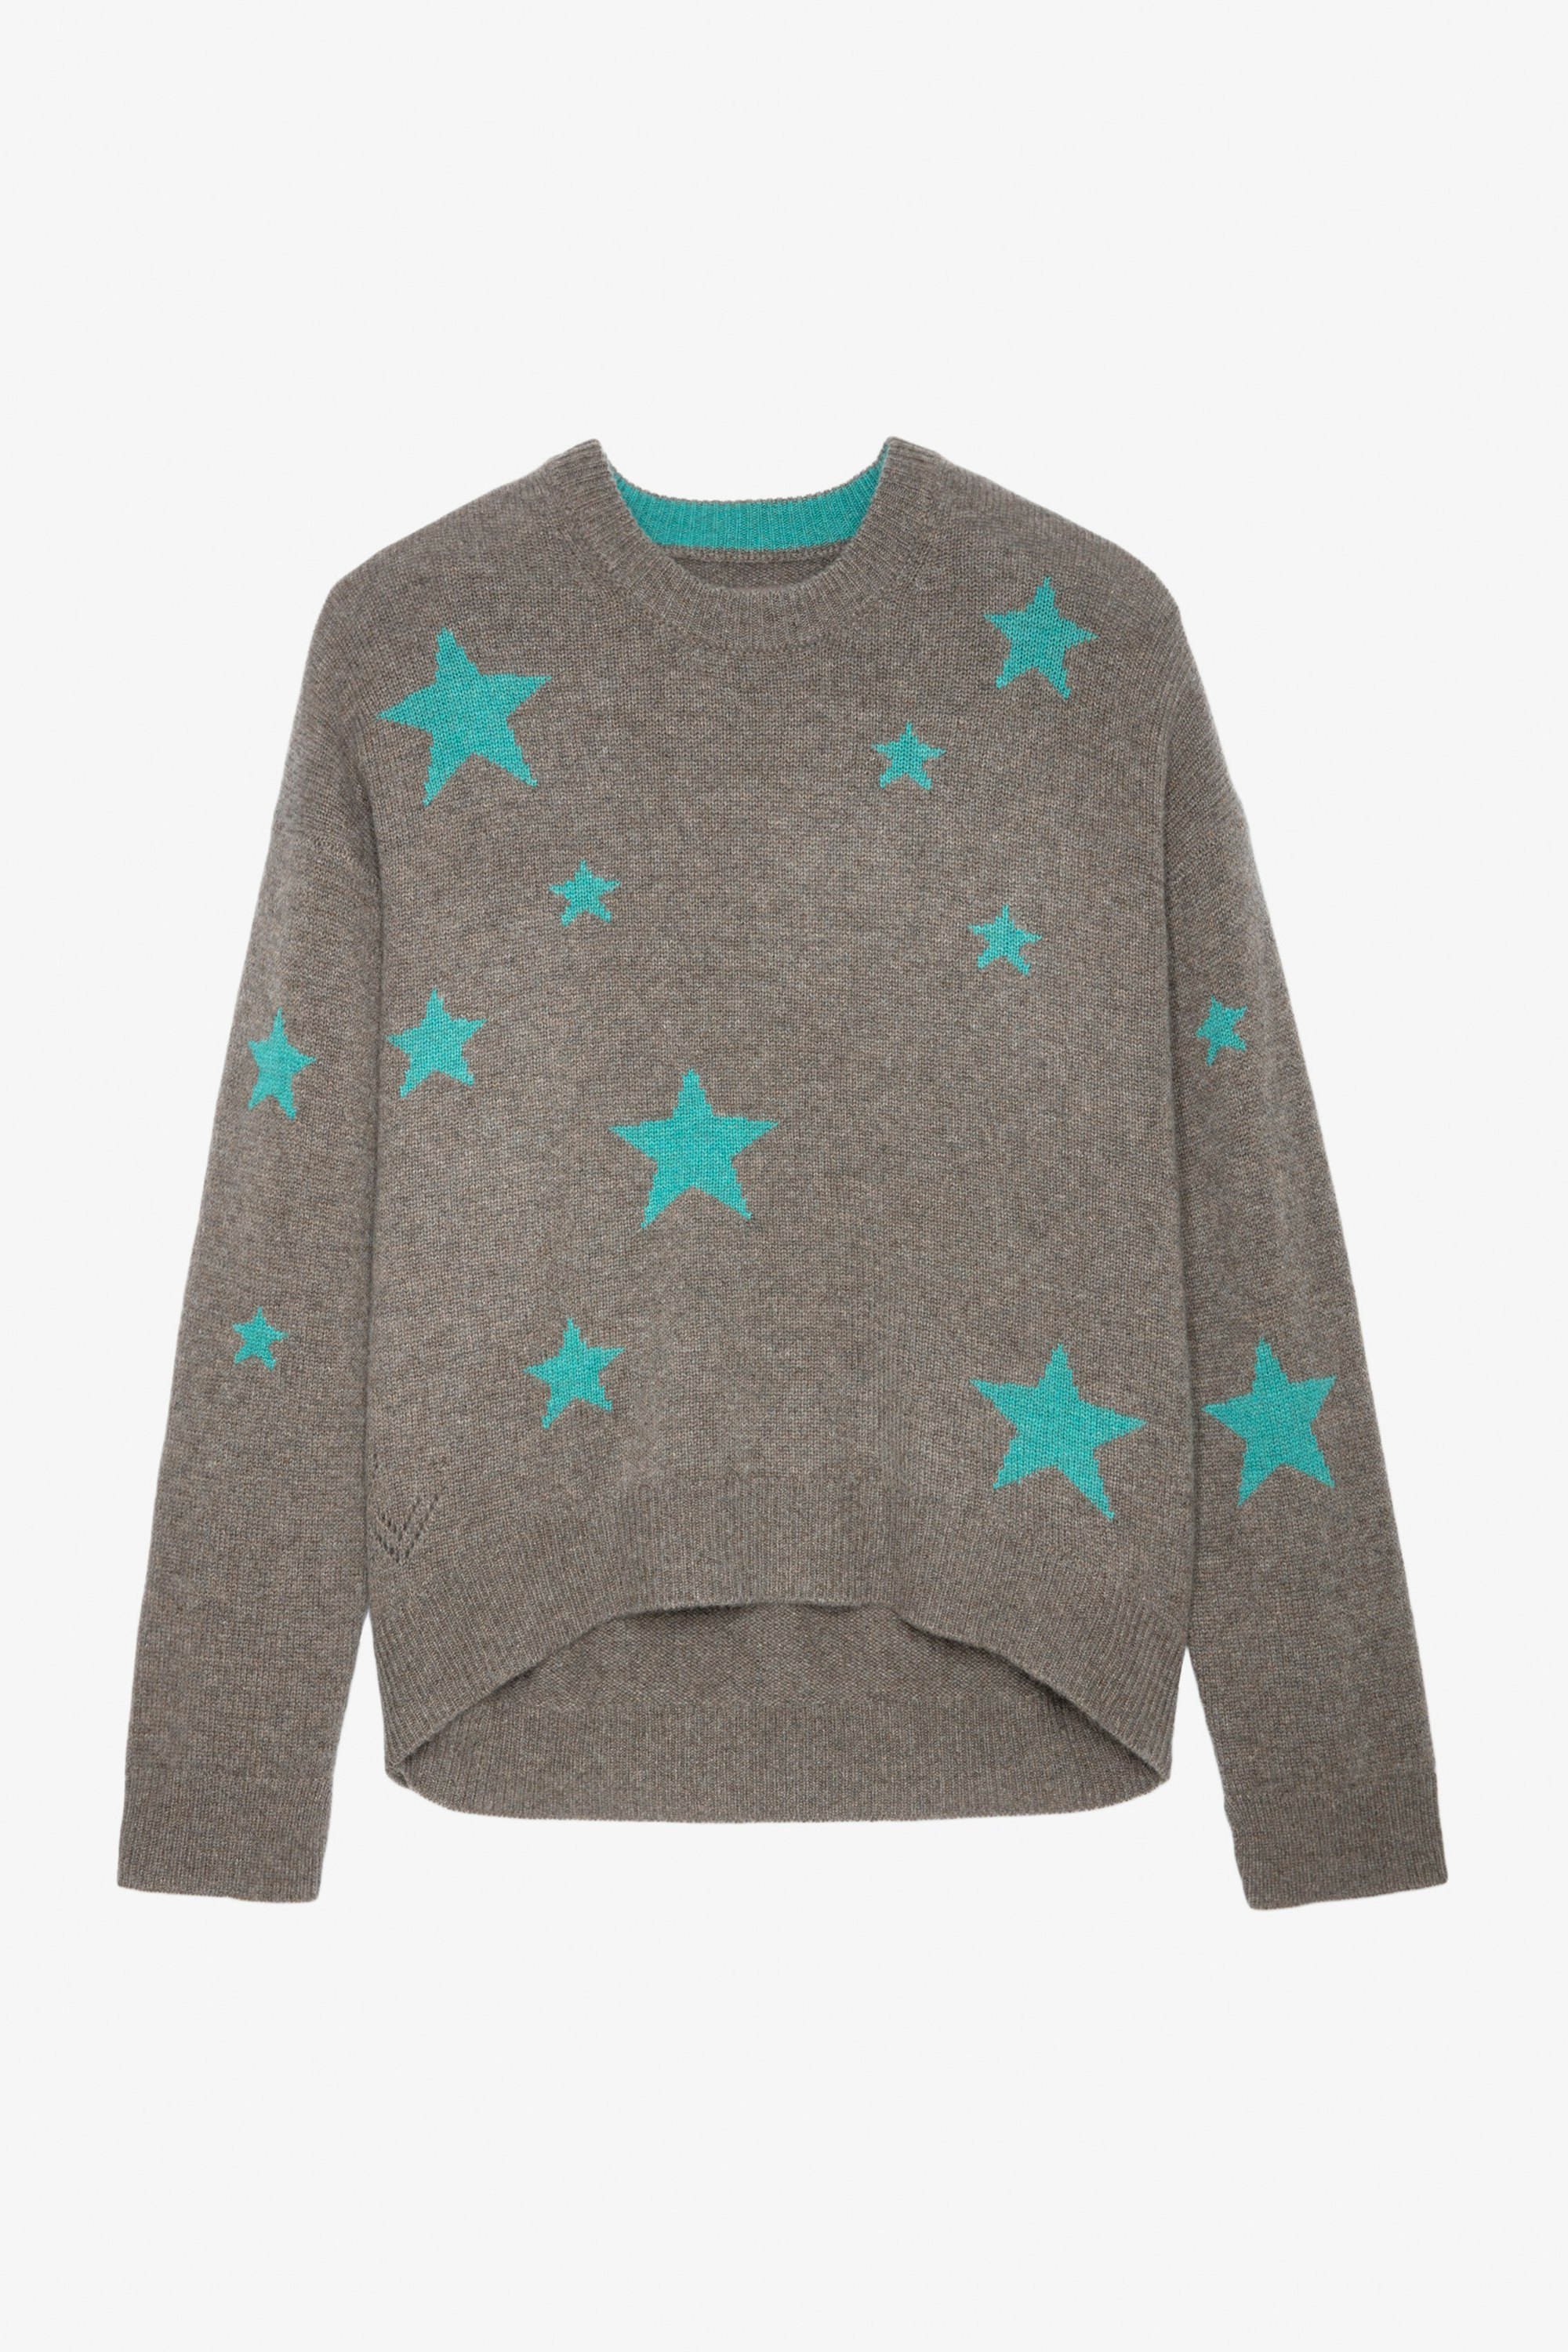 Markus Cashmere Sweater  - Women’s brown cashmere sweater with star-shaped motifs.